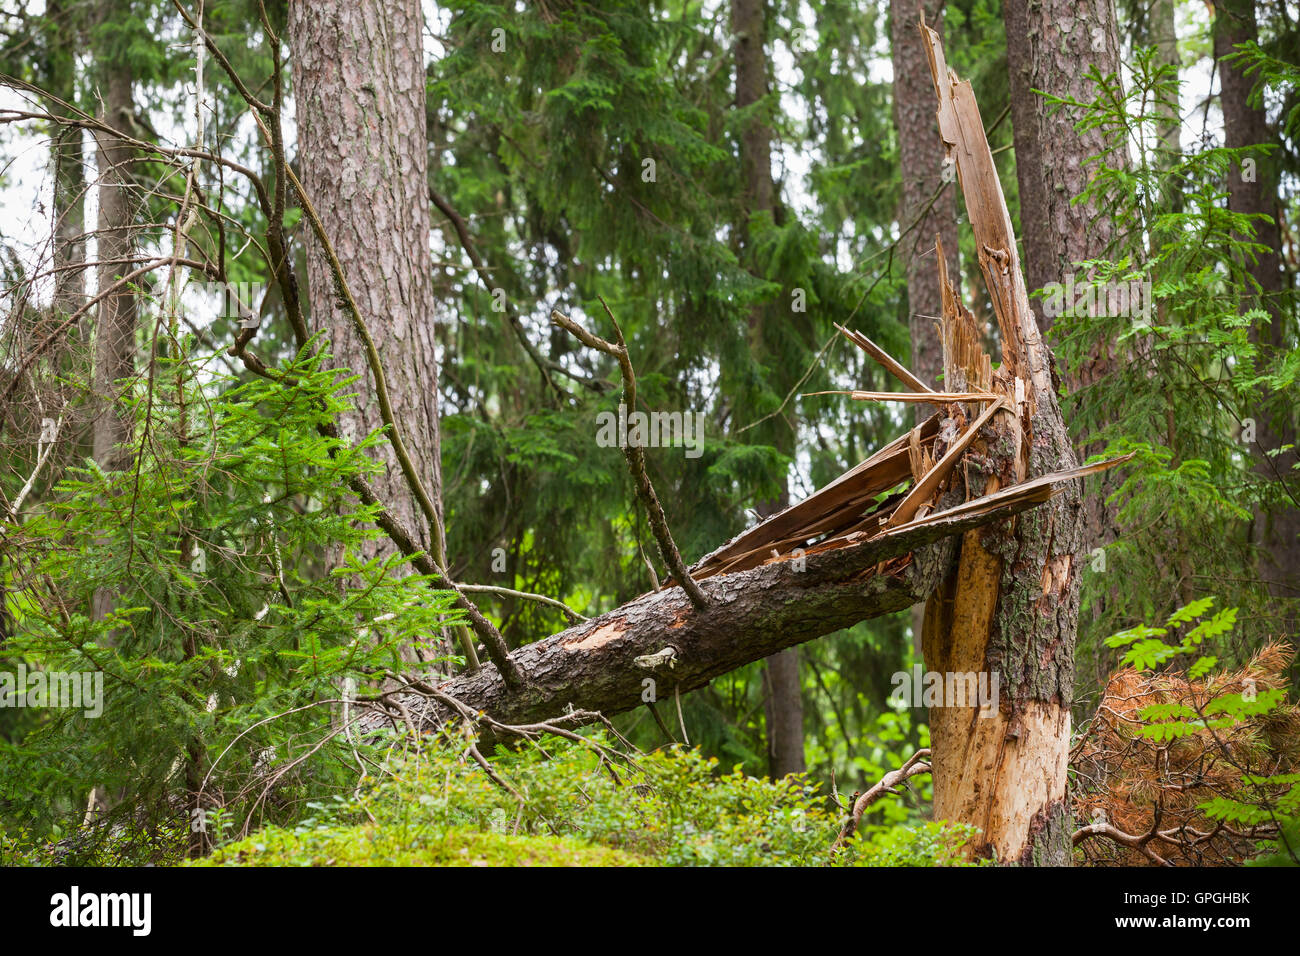 Broken spruce tree in the forest Stock Photo